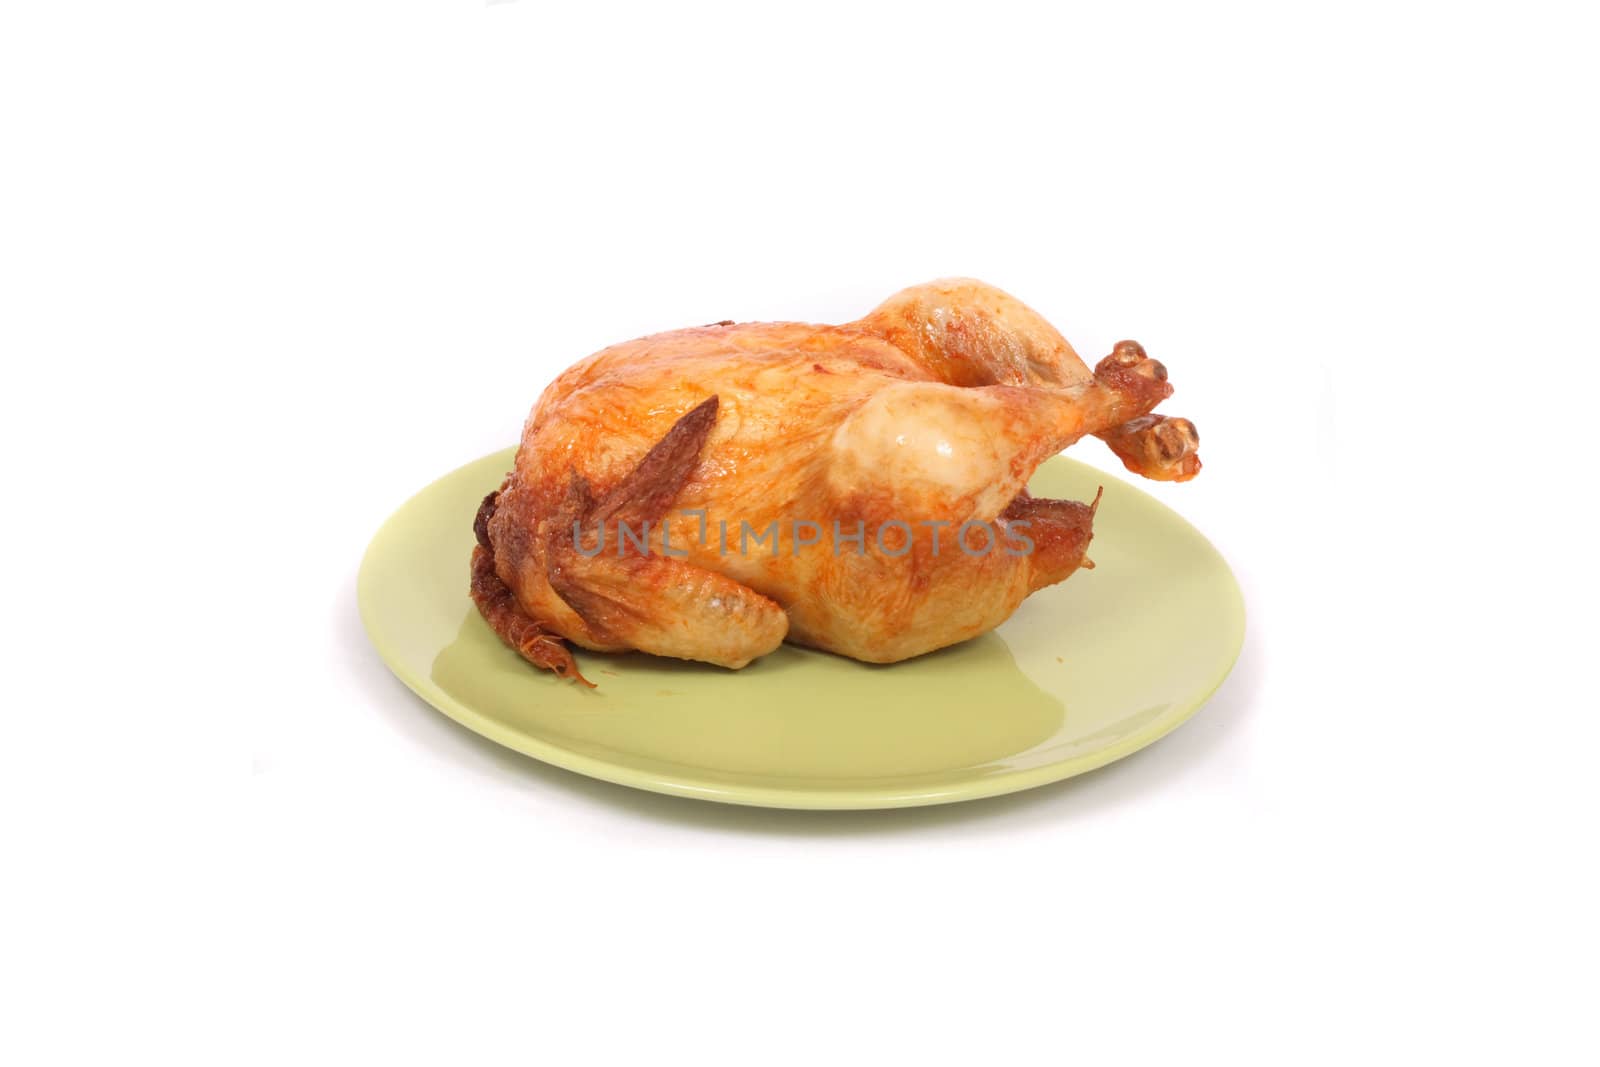 chicken on the green plate on the white background